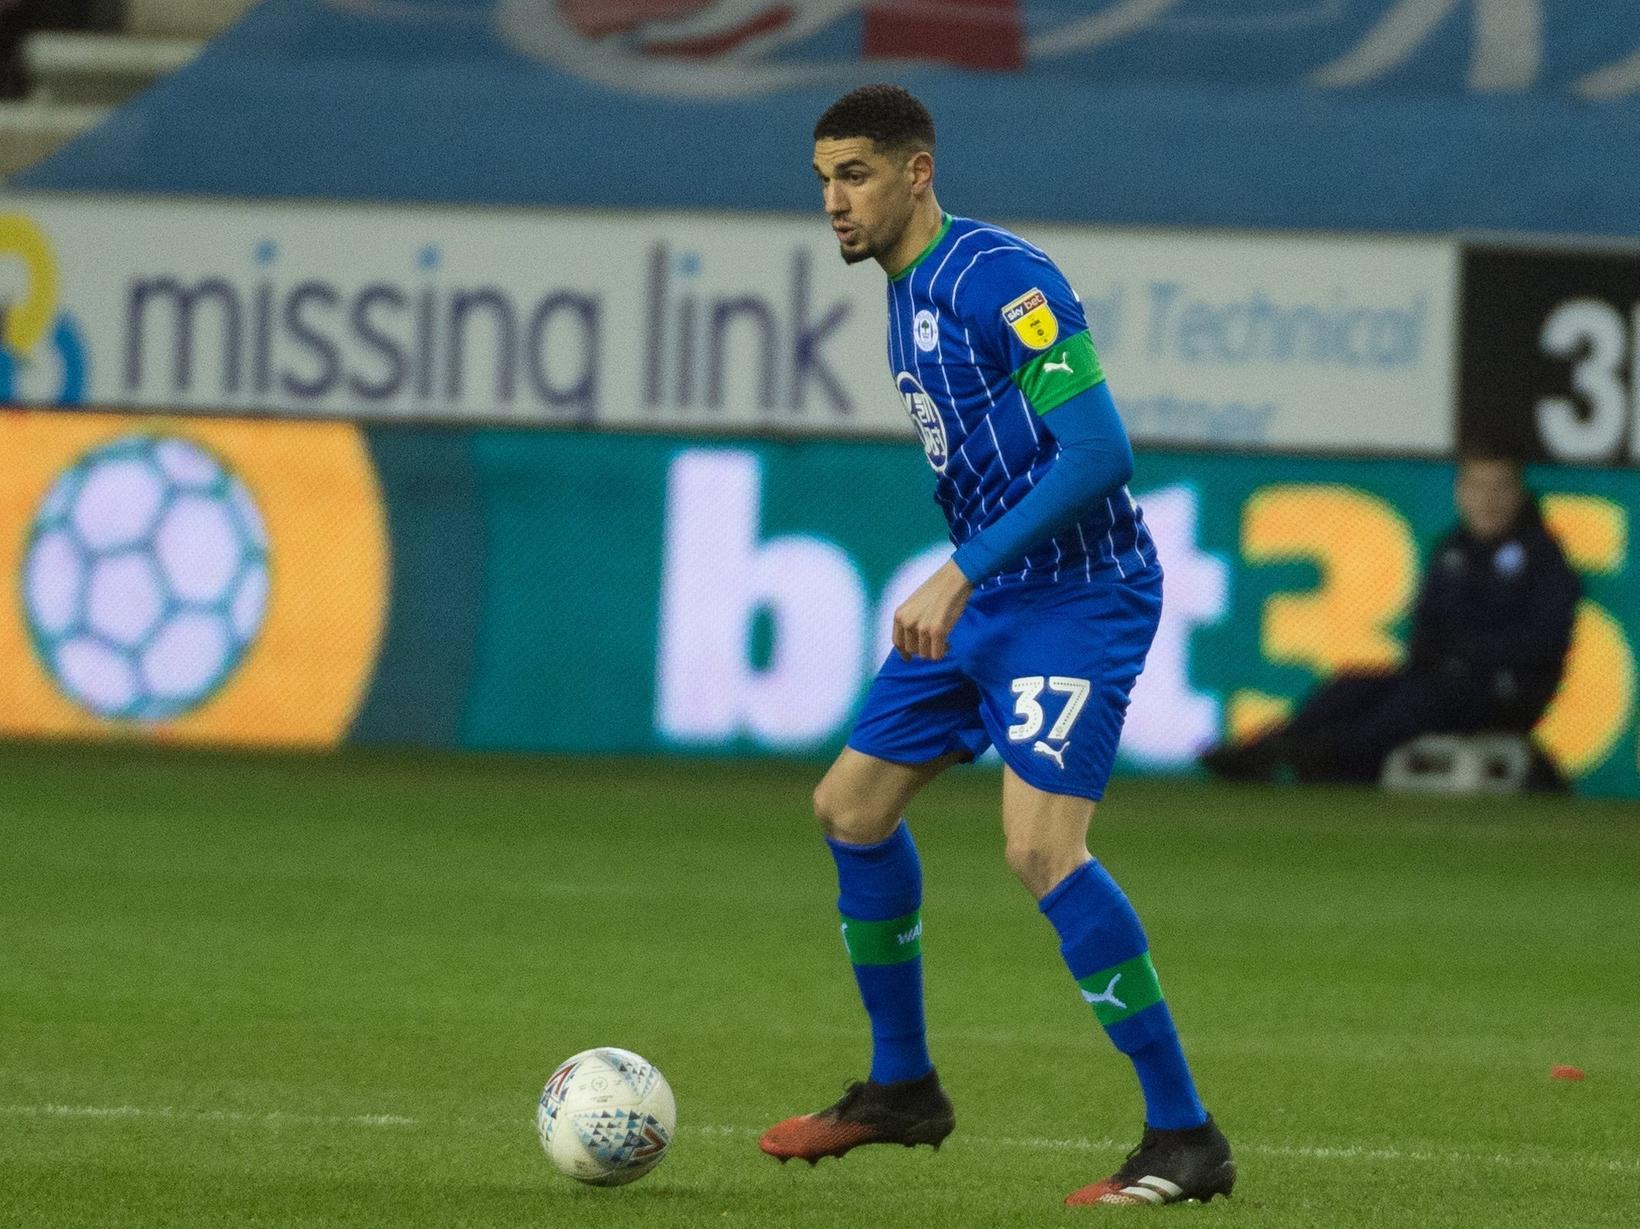 Leon Balogun: 8 - Stepped in for his full debut with minimum fuss, can only get better once ring rust has disappeared